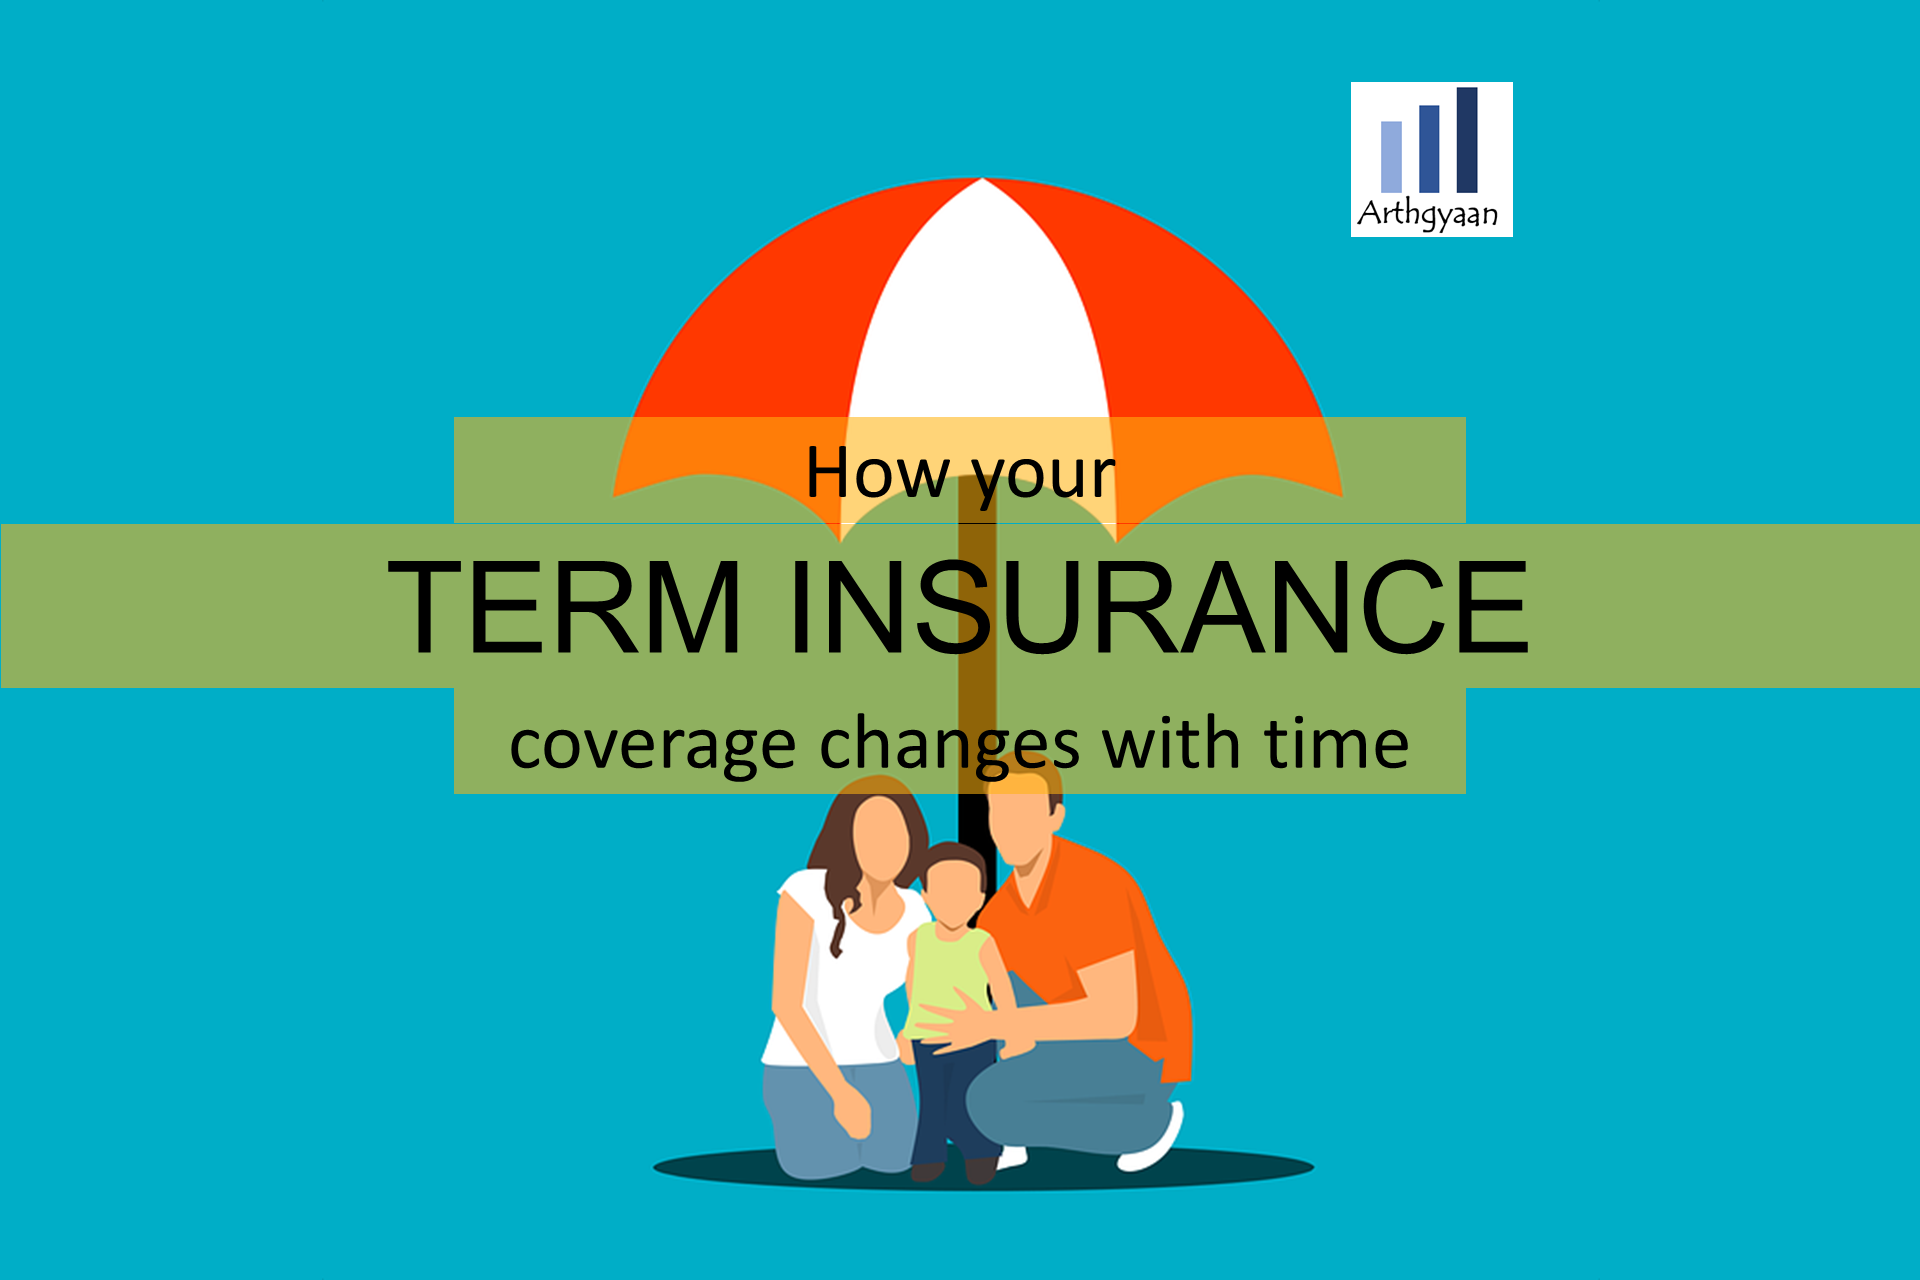 <p>Term insurance coverage needs to be reviewed as per life stages. This post shows how to do that.</p>

